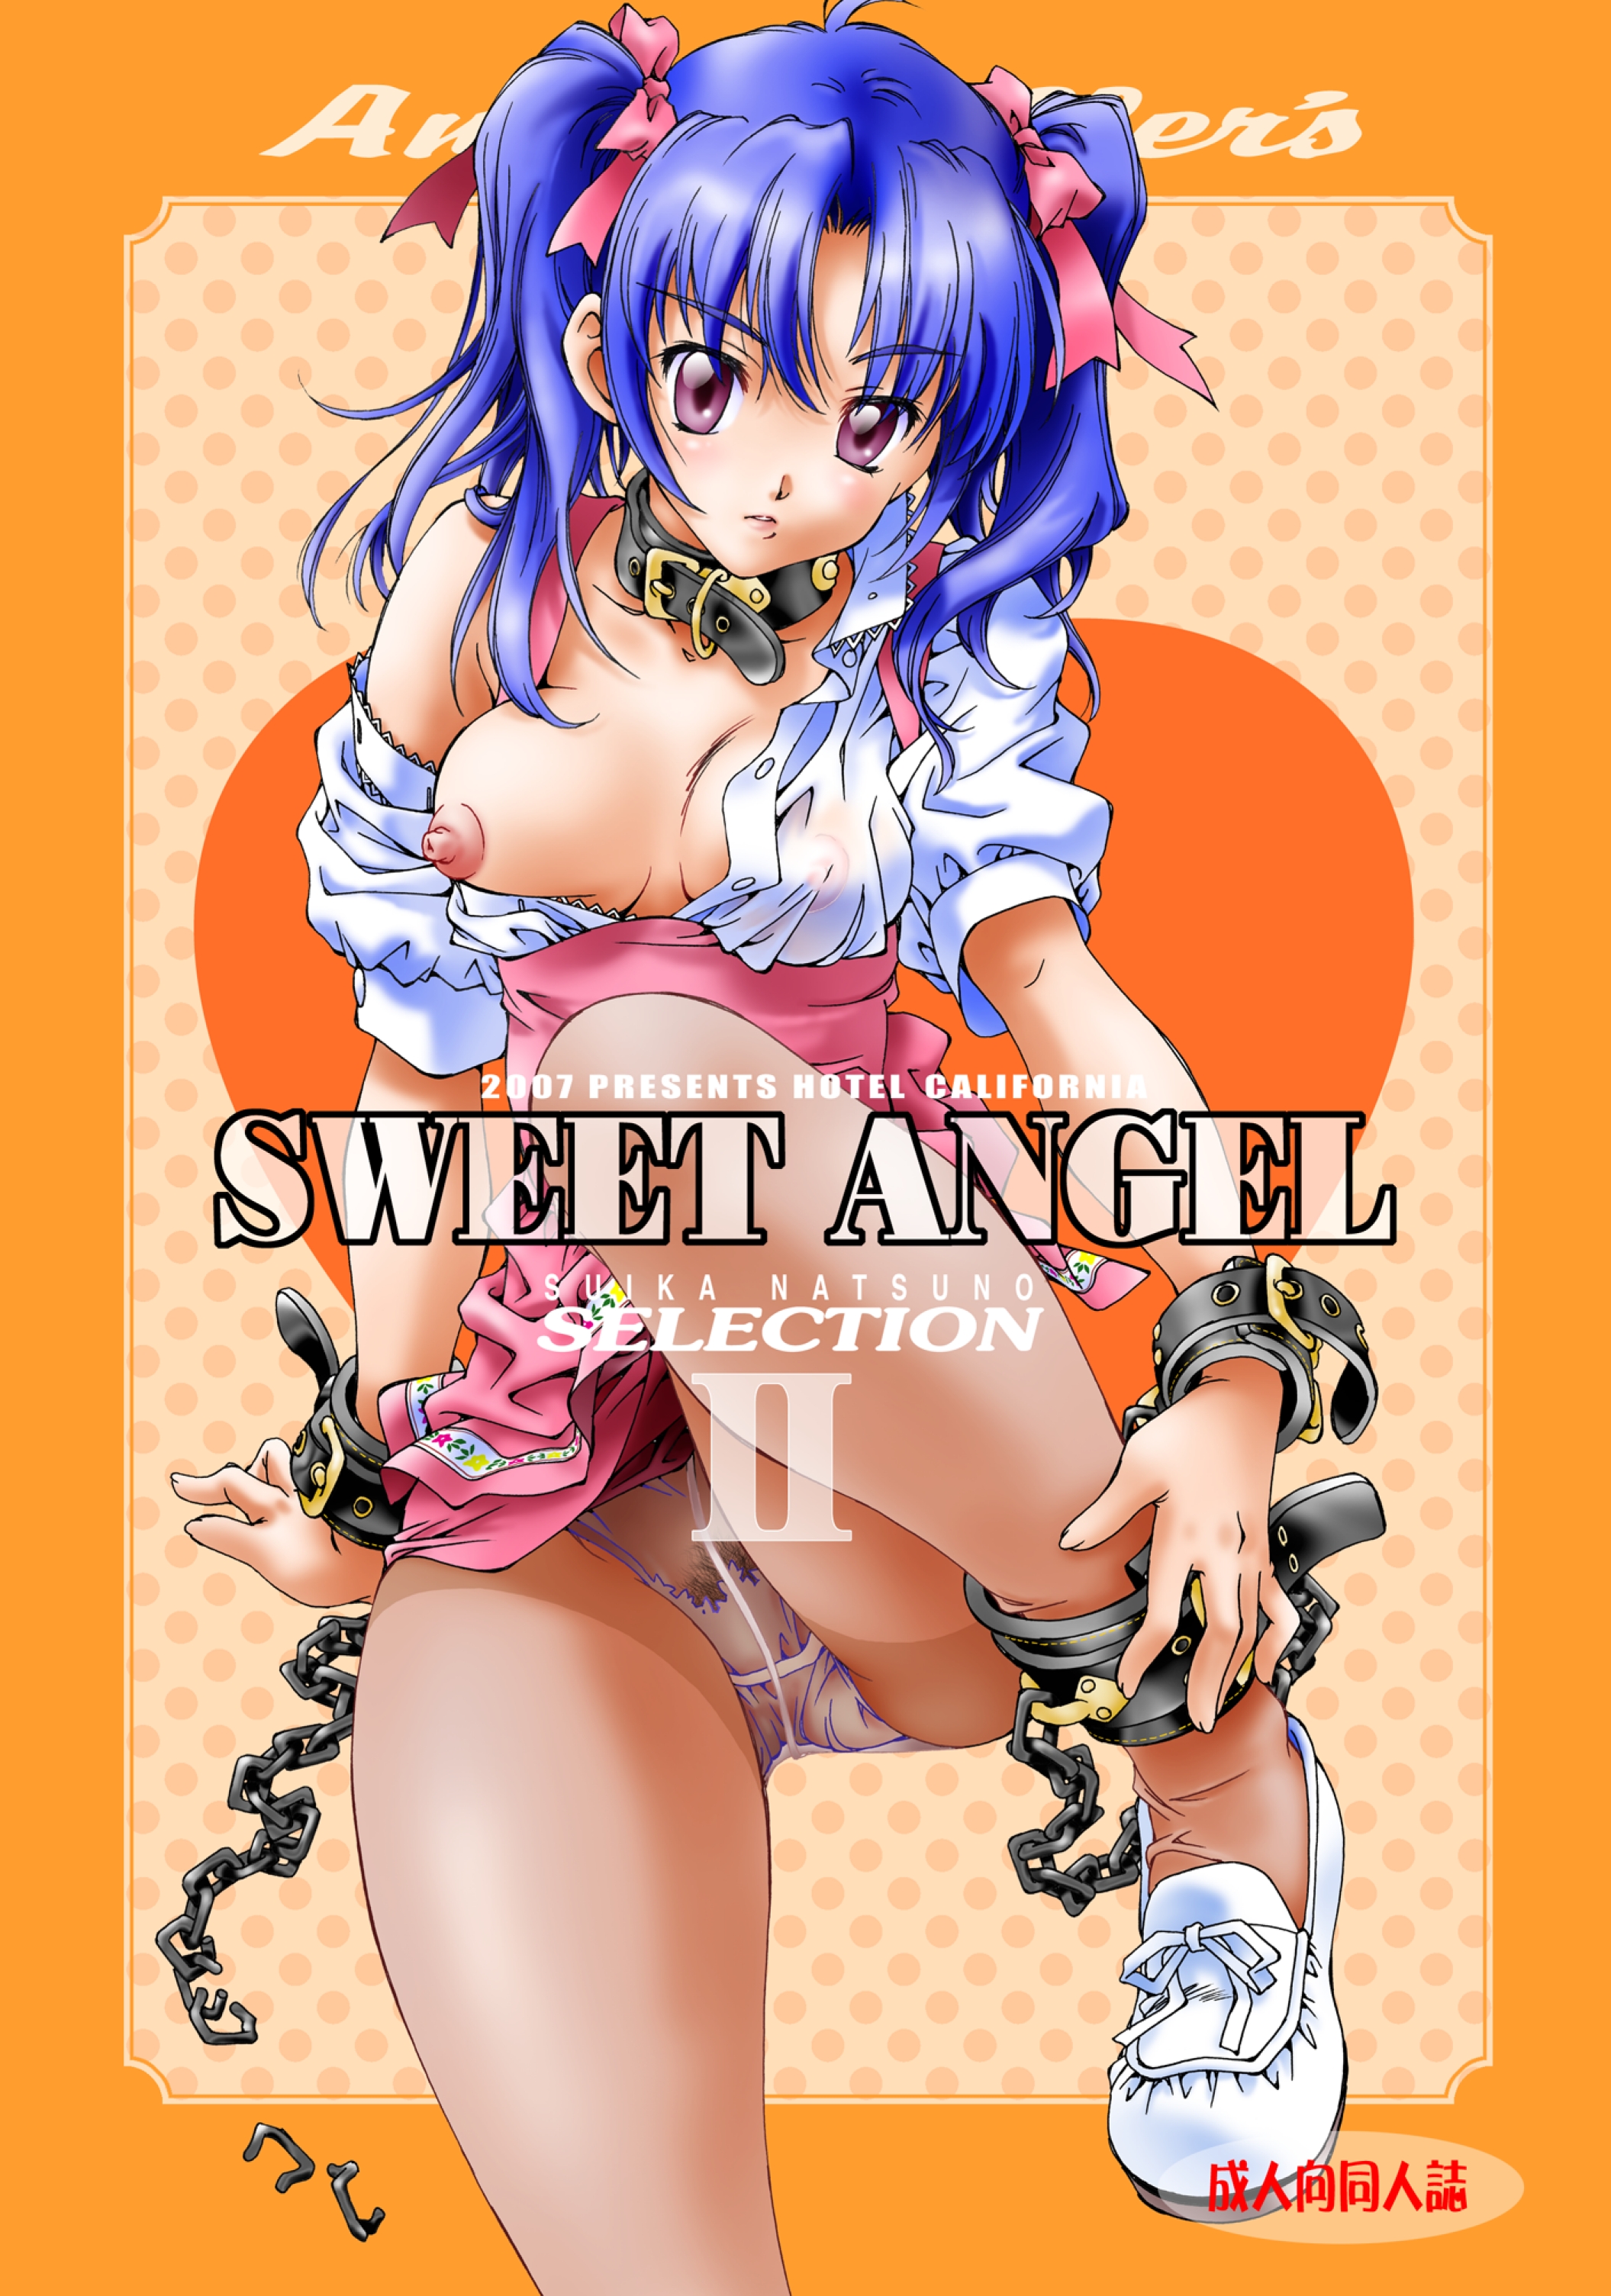 SWEET ANGEL SELECTION 2 DL 01